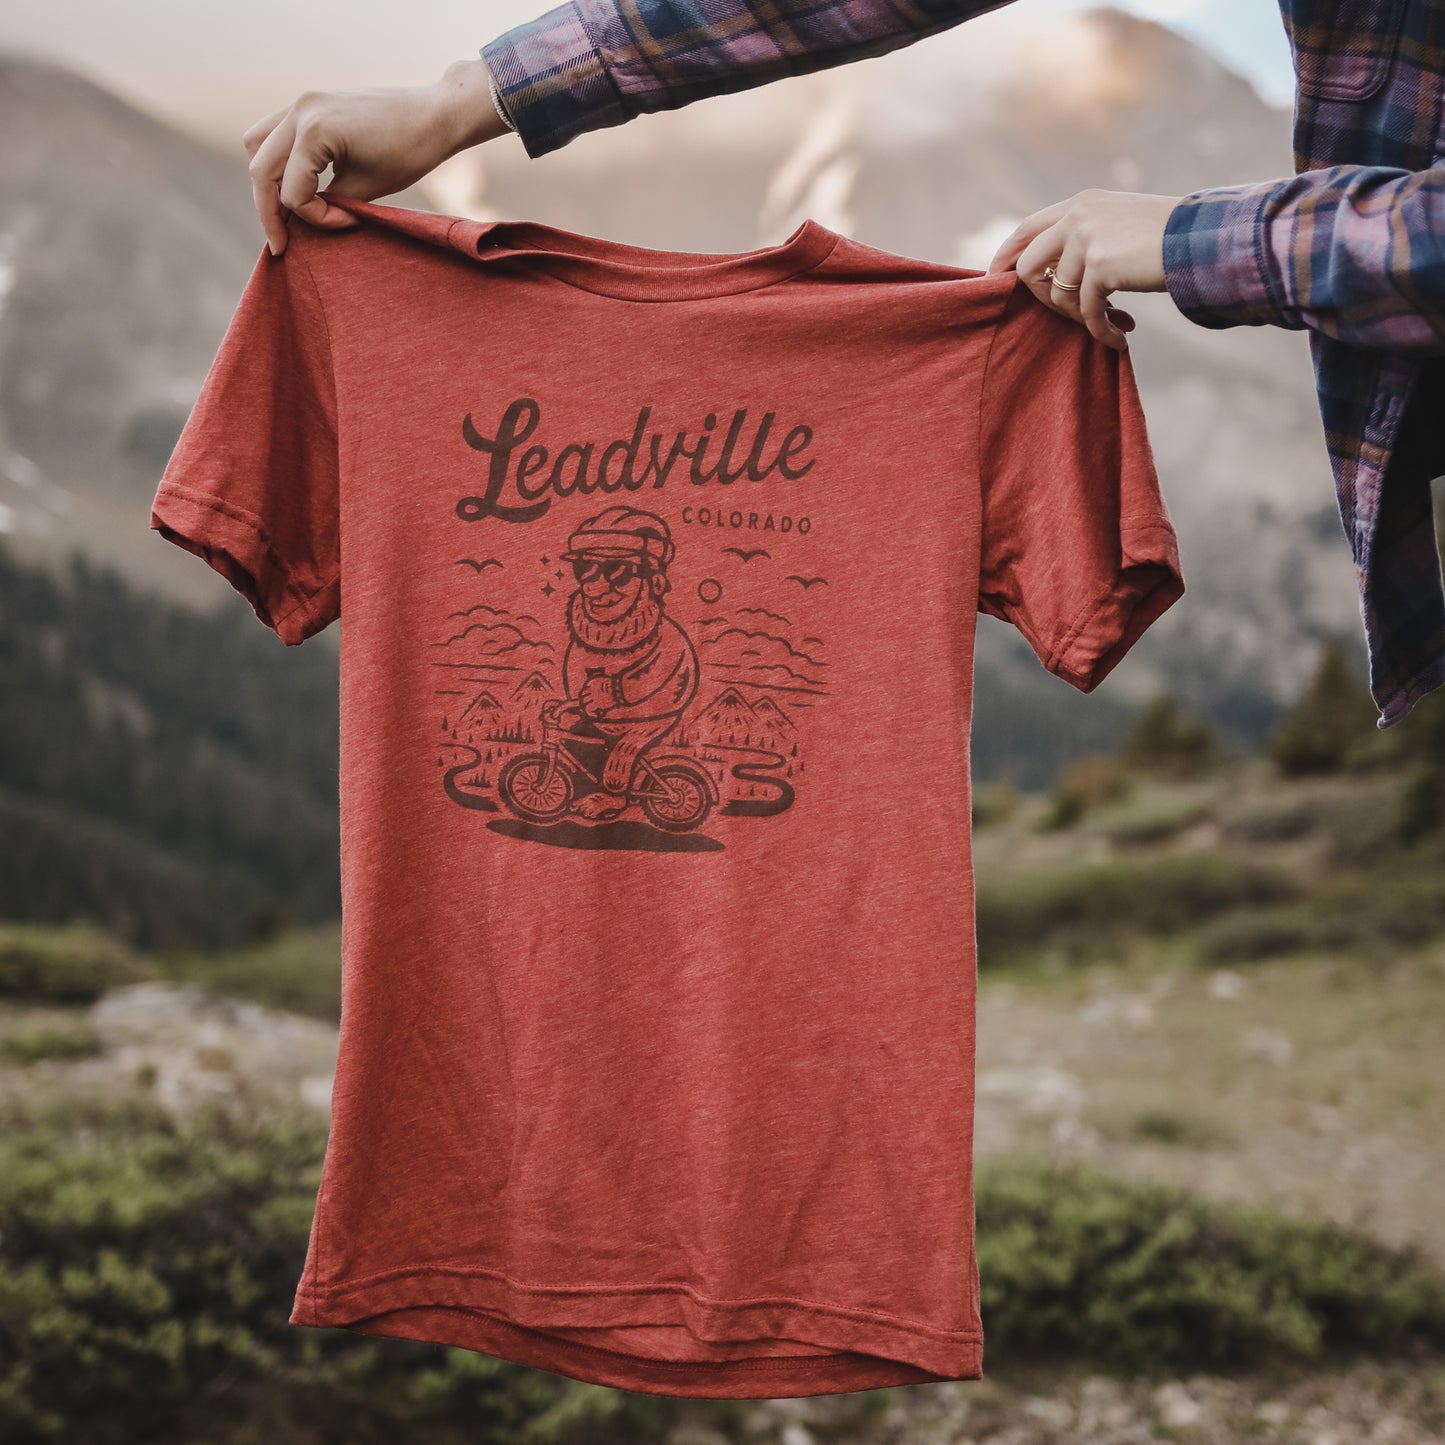 Yeti on Bike graphic Leadville t-shirt in Red